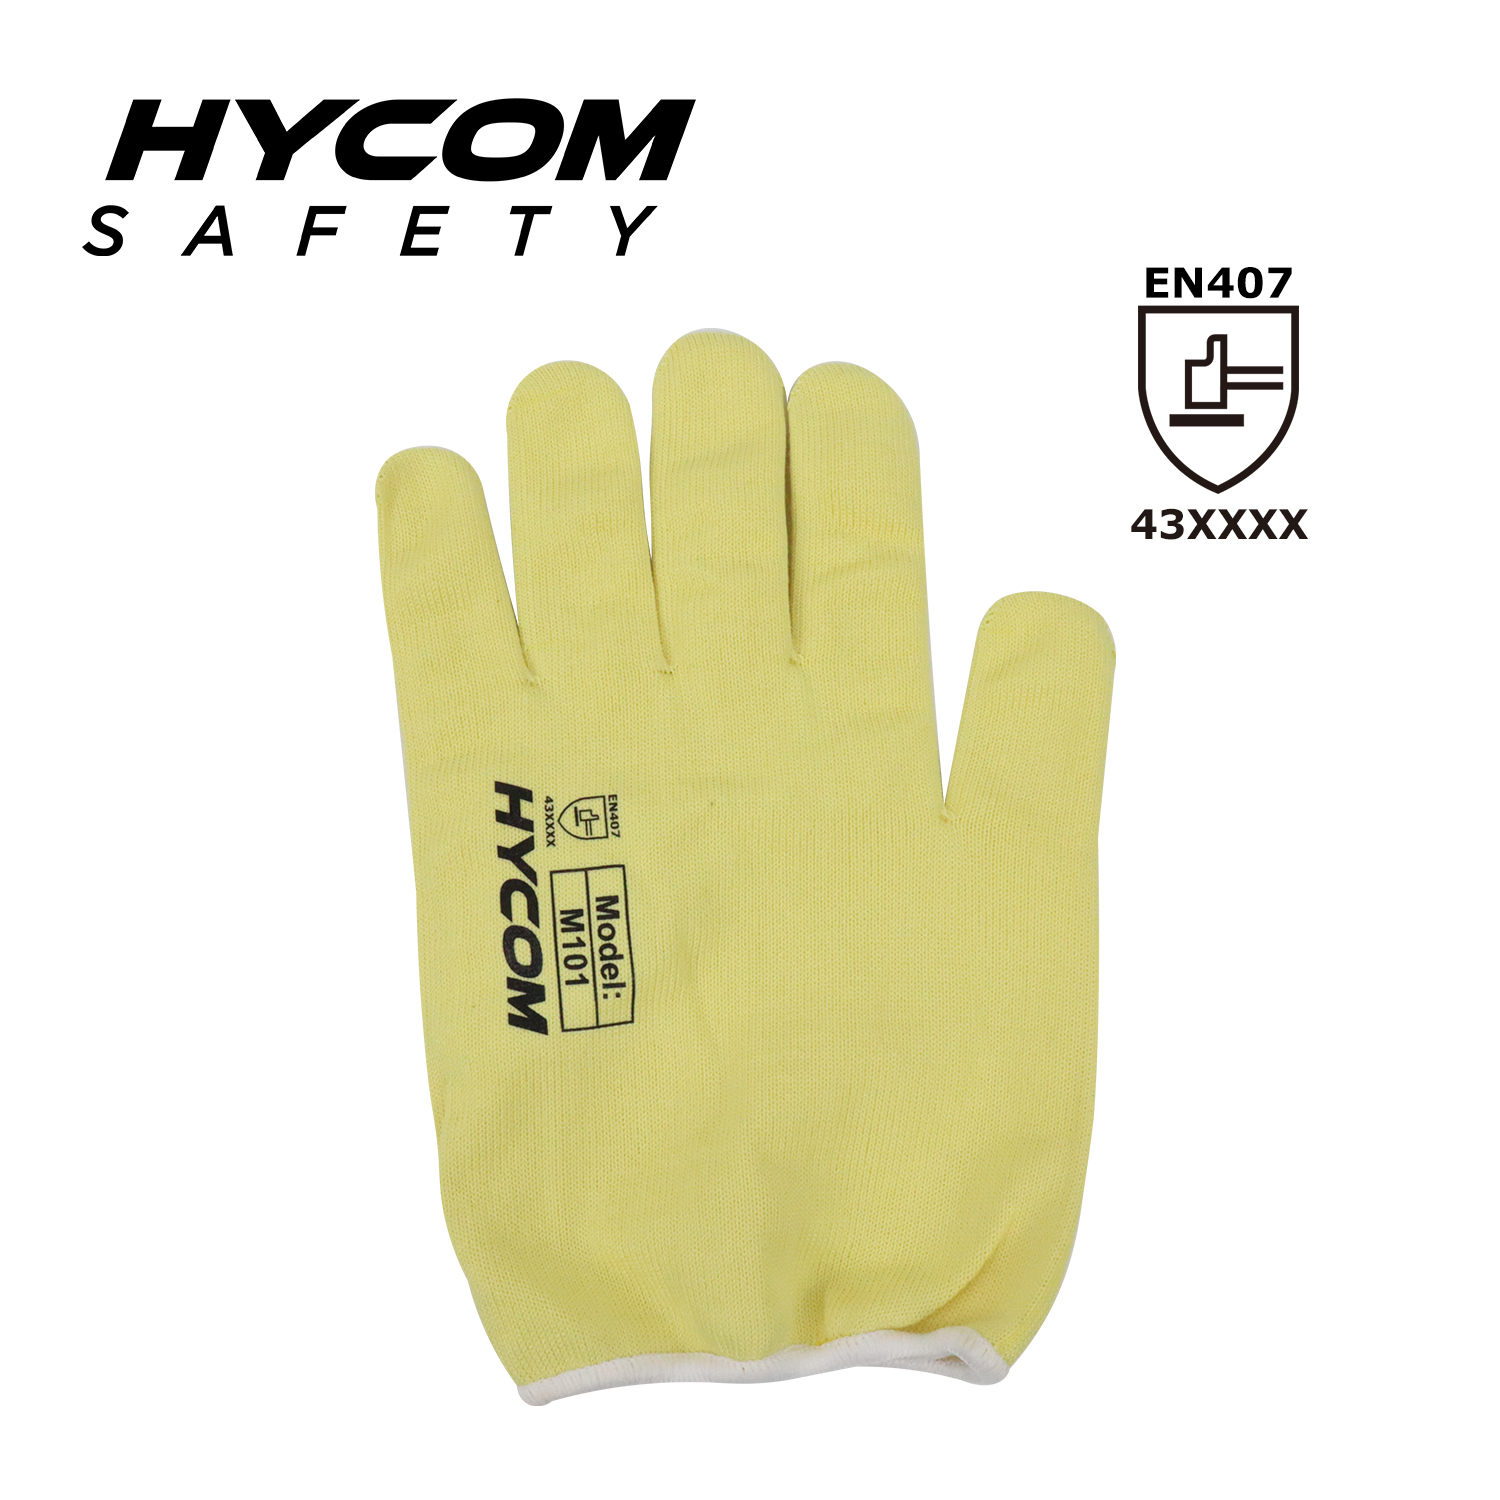 HYCOM 10G ANSI 2 Aramid Cut Resistant Glove Dust Free with Contact High Temperature 350°C/650F